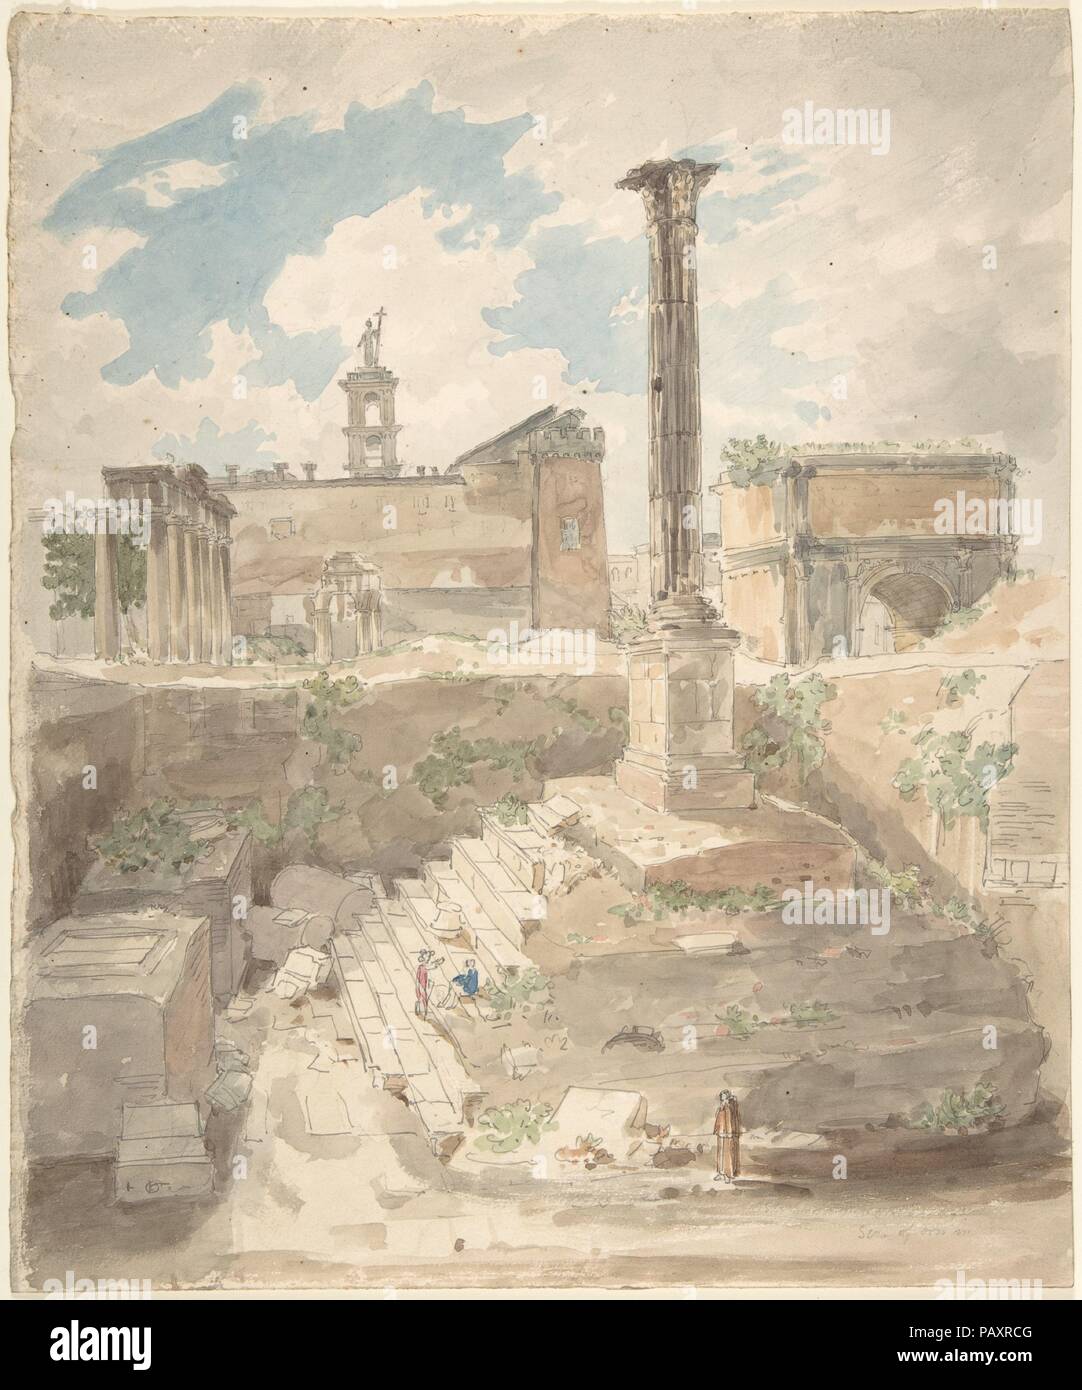 View of the Roman Forum, unexcavated. Artist: Attributed to Sir Charles Barry (British, London 1795-1860 London). Dimensions: sheet: 13 1/4 x 11 in. (33.7 x 27.9 cm). Date: 1840. Museum: Metropolitan Museum of Art, New York, USA. Stock Photo